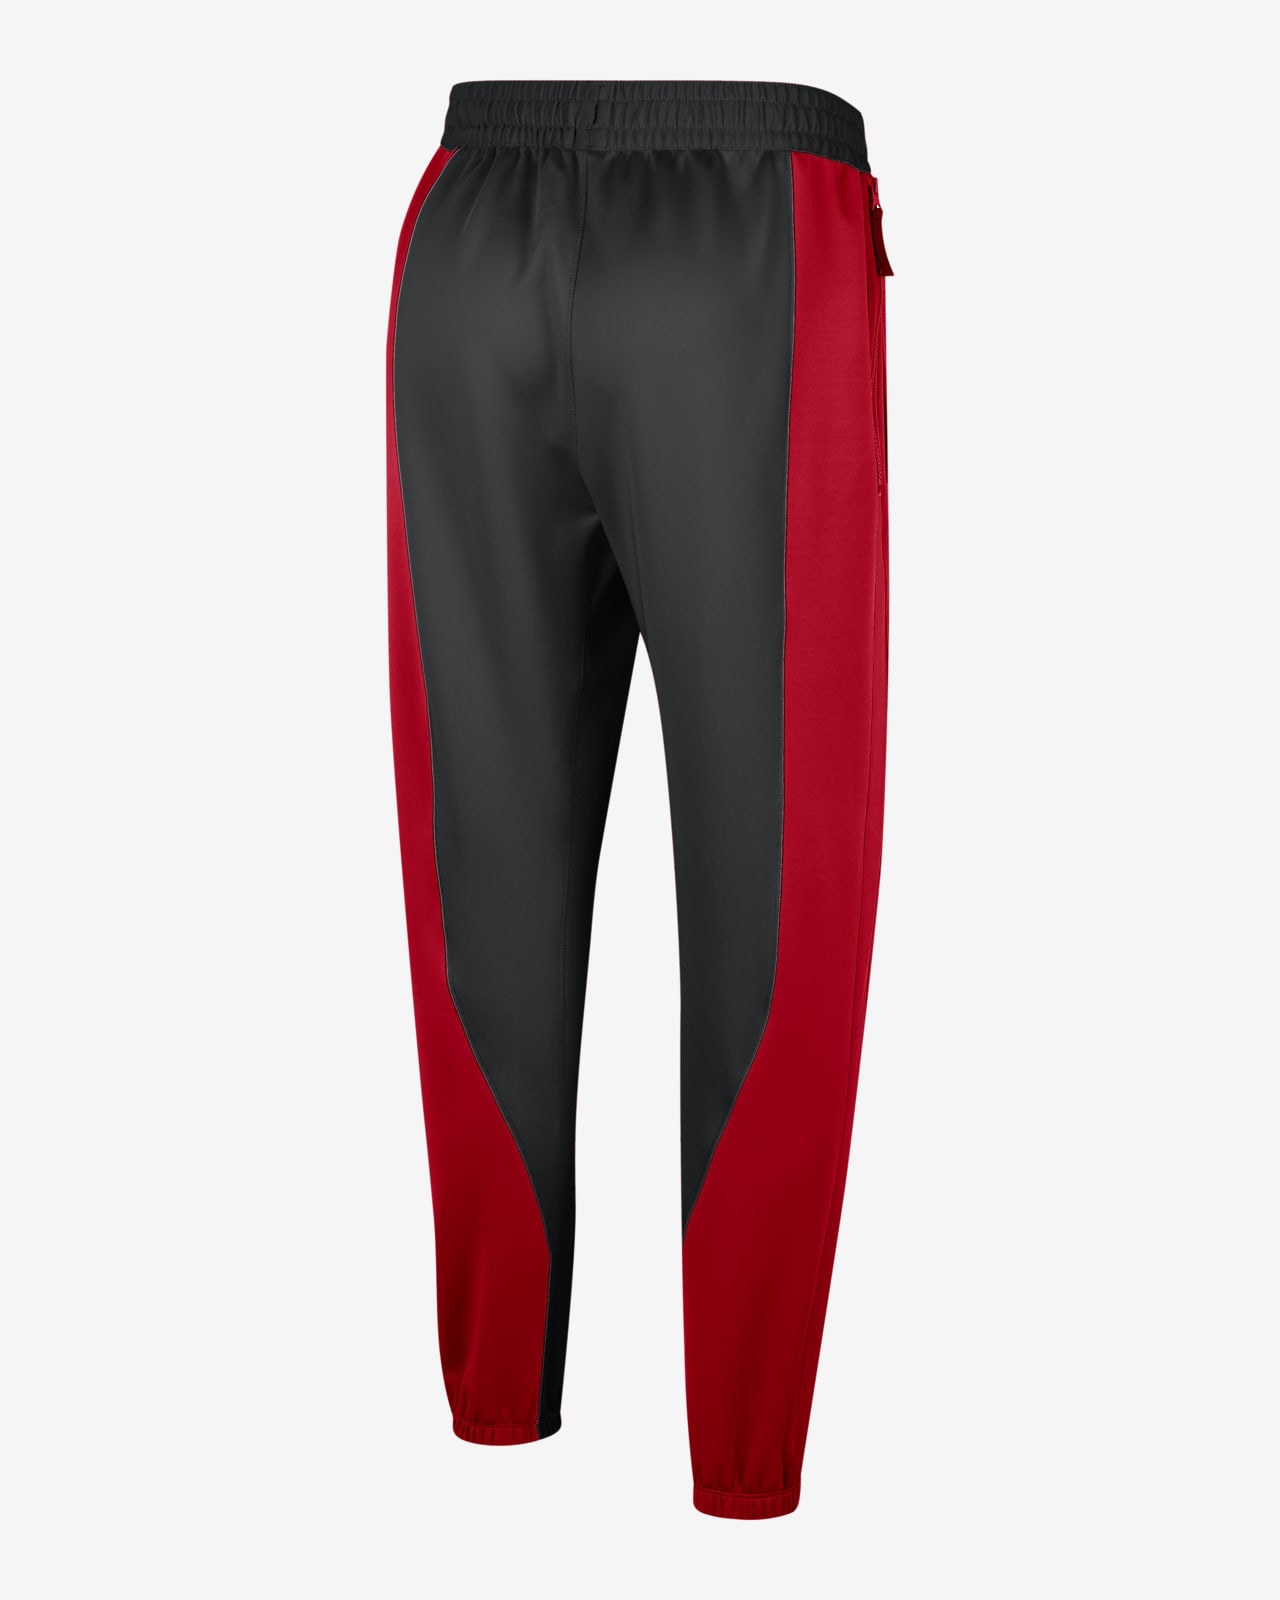 Chicago Bulls Nike 2023/24 Authentic Showtime Performance Pants - Red/Black